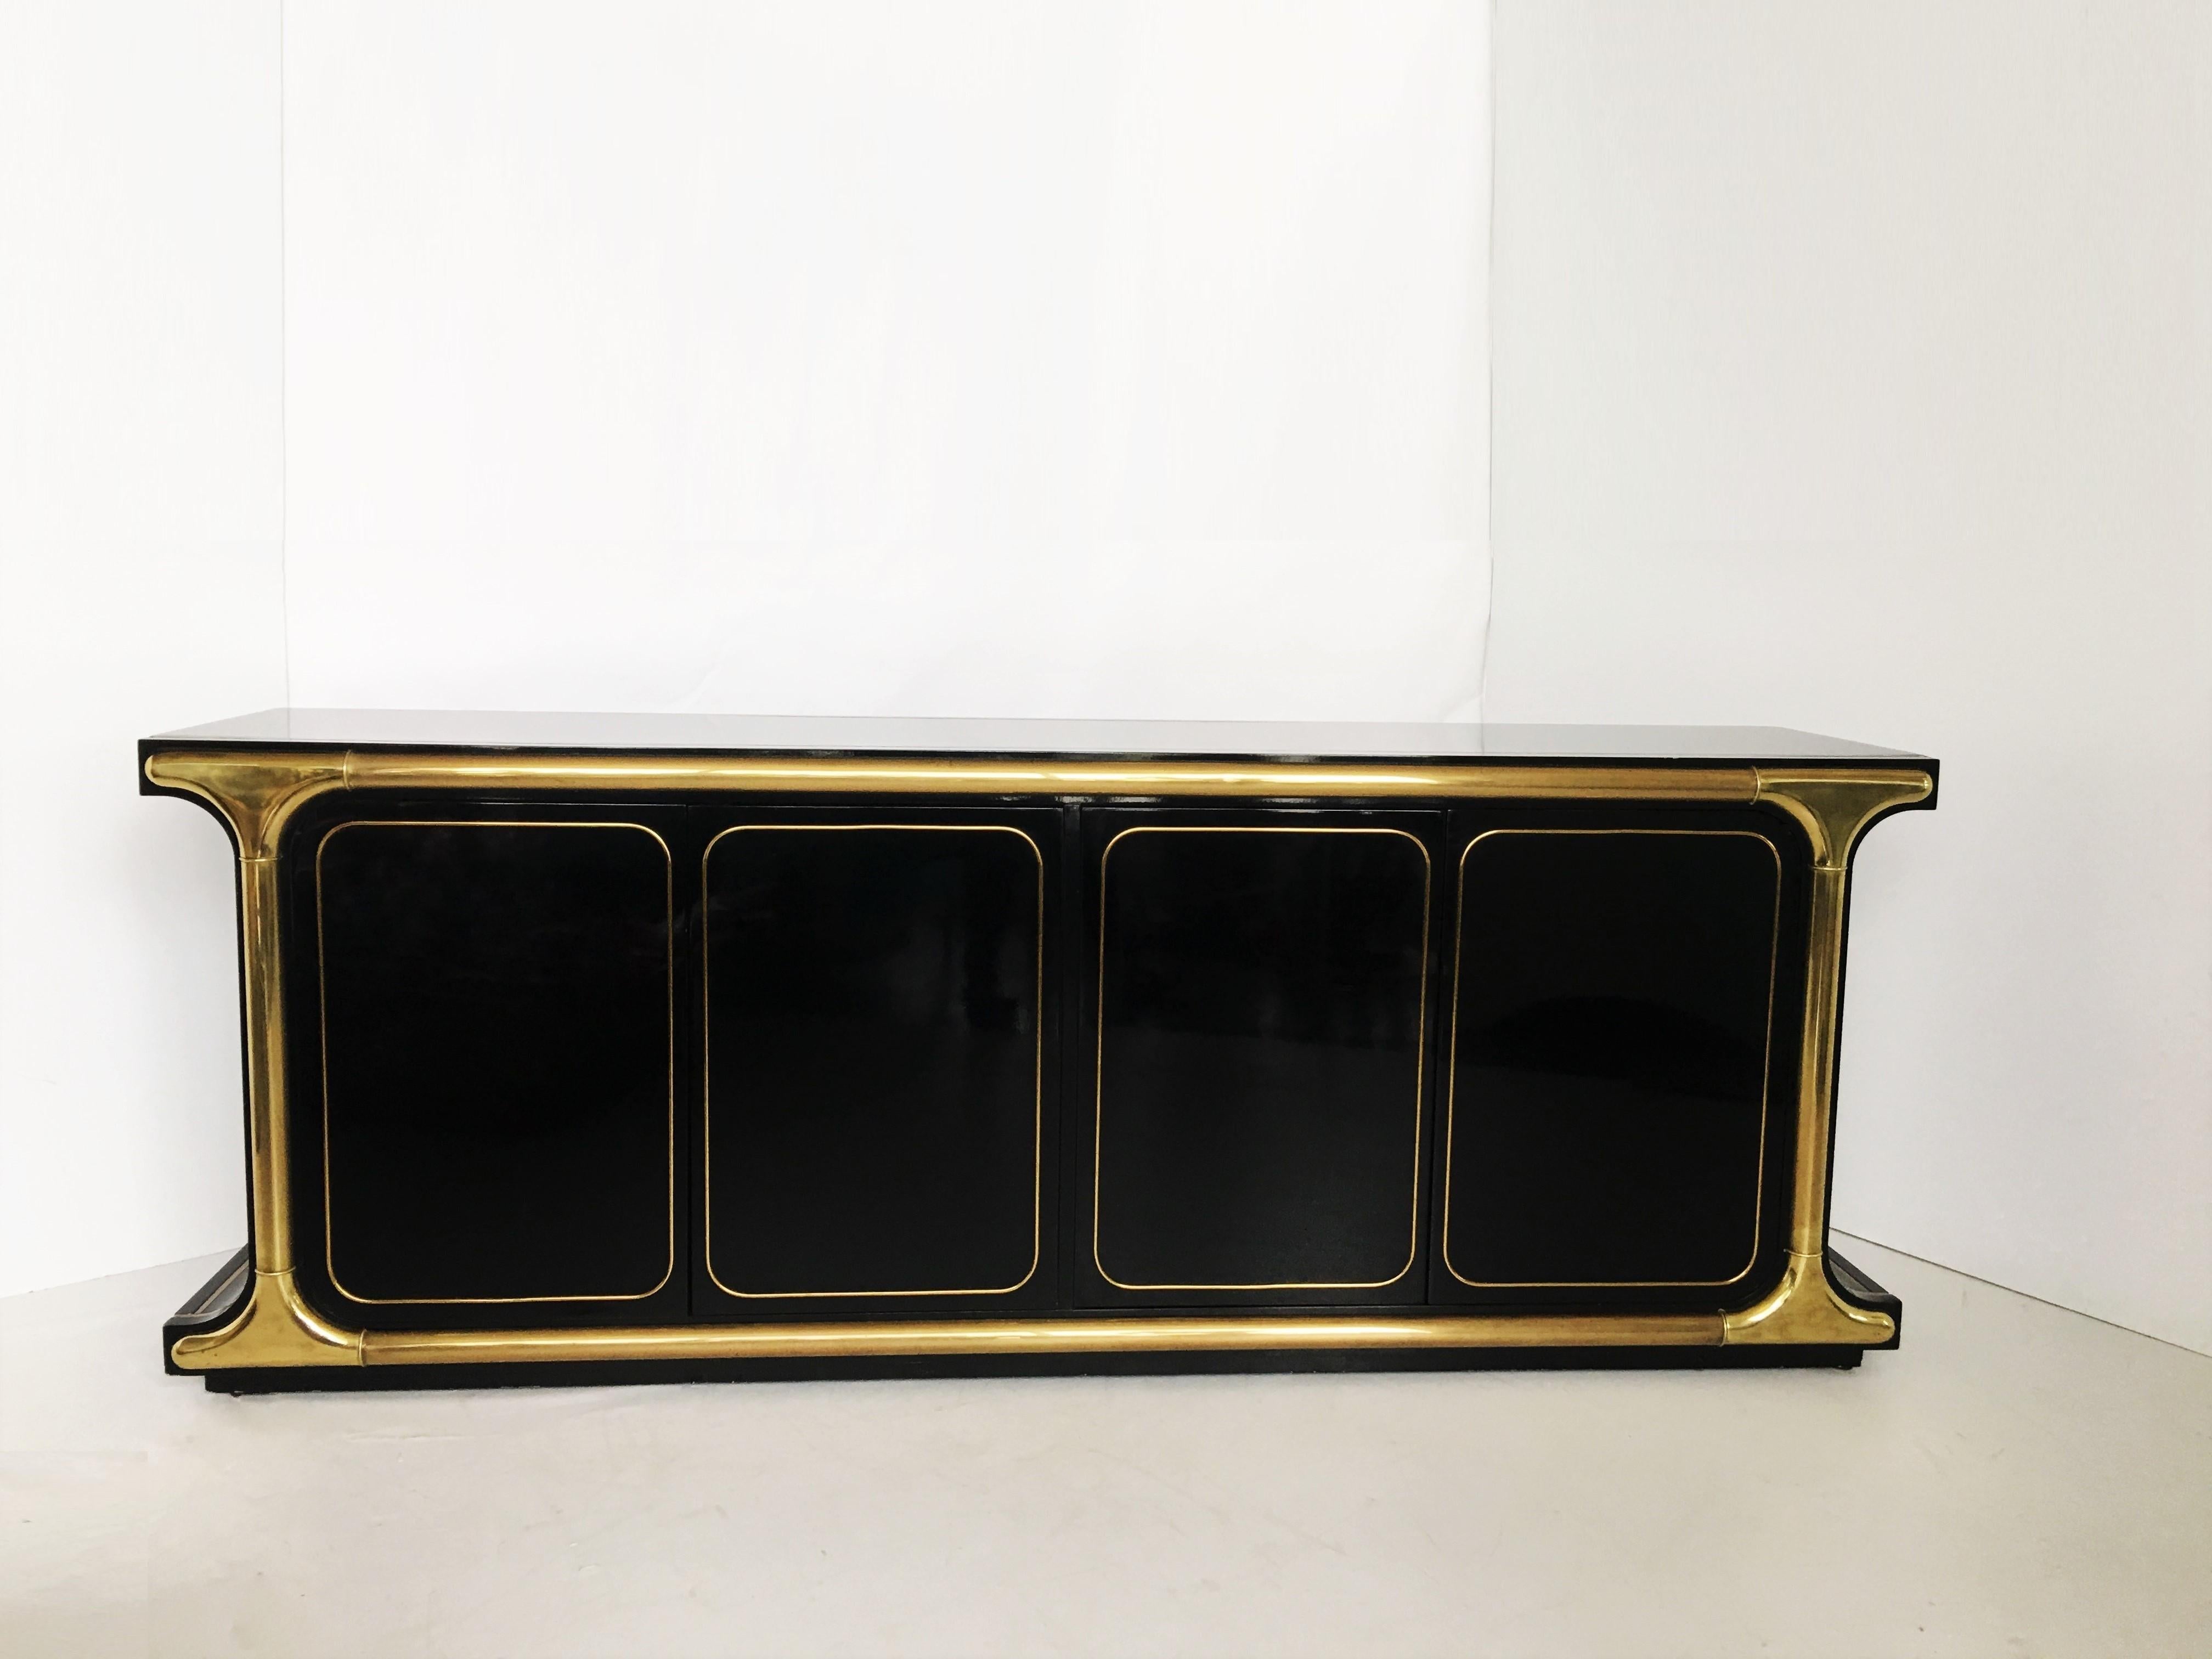 Glamorous one-of-a-kind piece designed by the great Mastercraft in Grand Rapids. Features a black lacquer body, both sides have a gentle curve. Substantial brass trim pieces and graphic brass inlays. Each side has a pair of touch-latch doors that